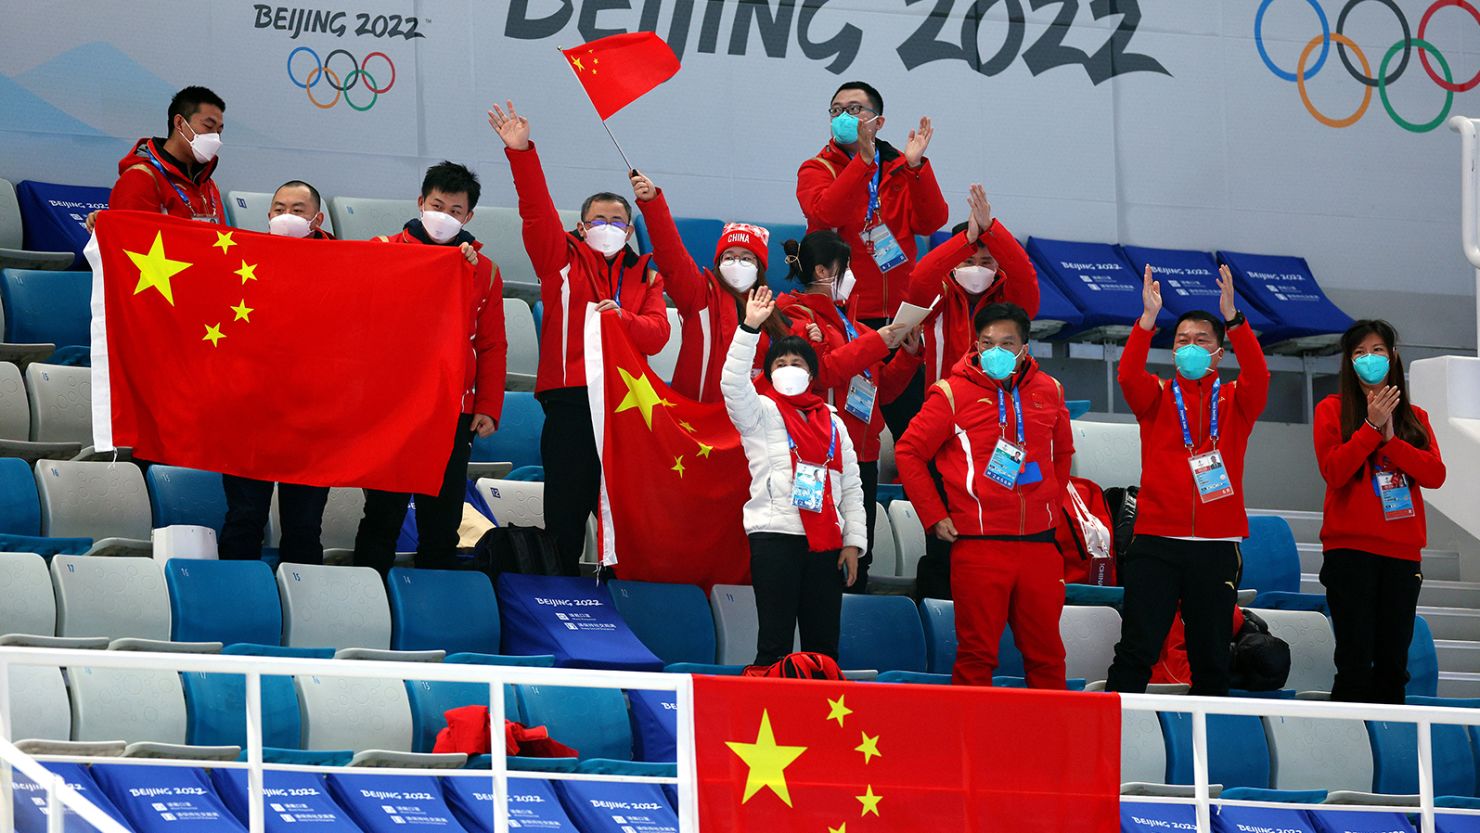 The Olympics was a success inside China. And that's the audience